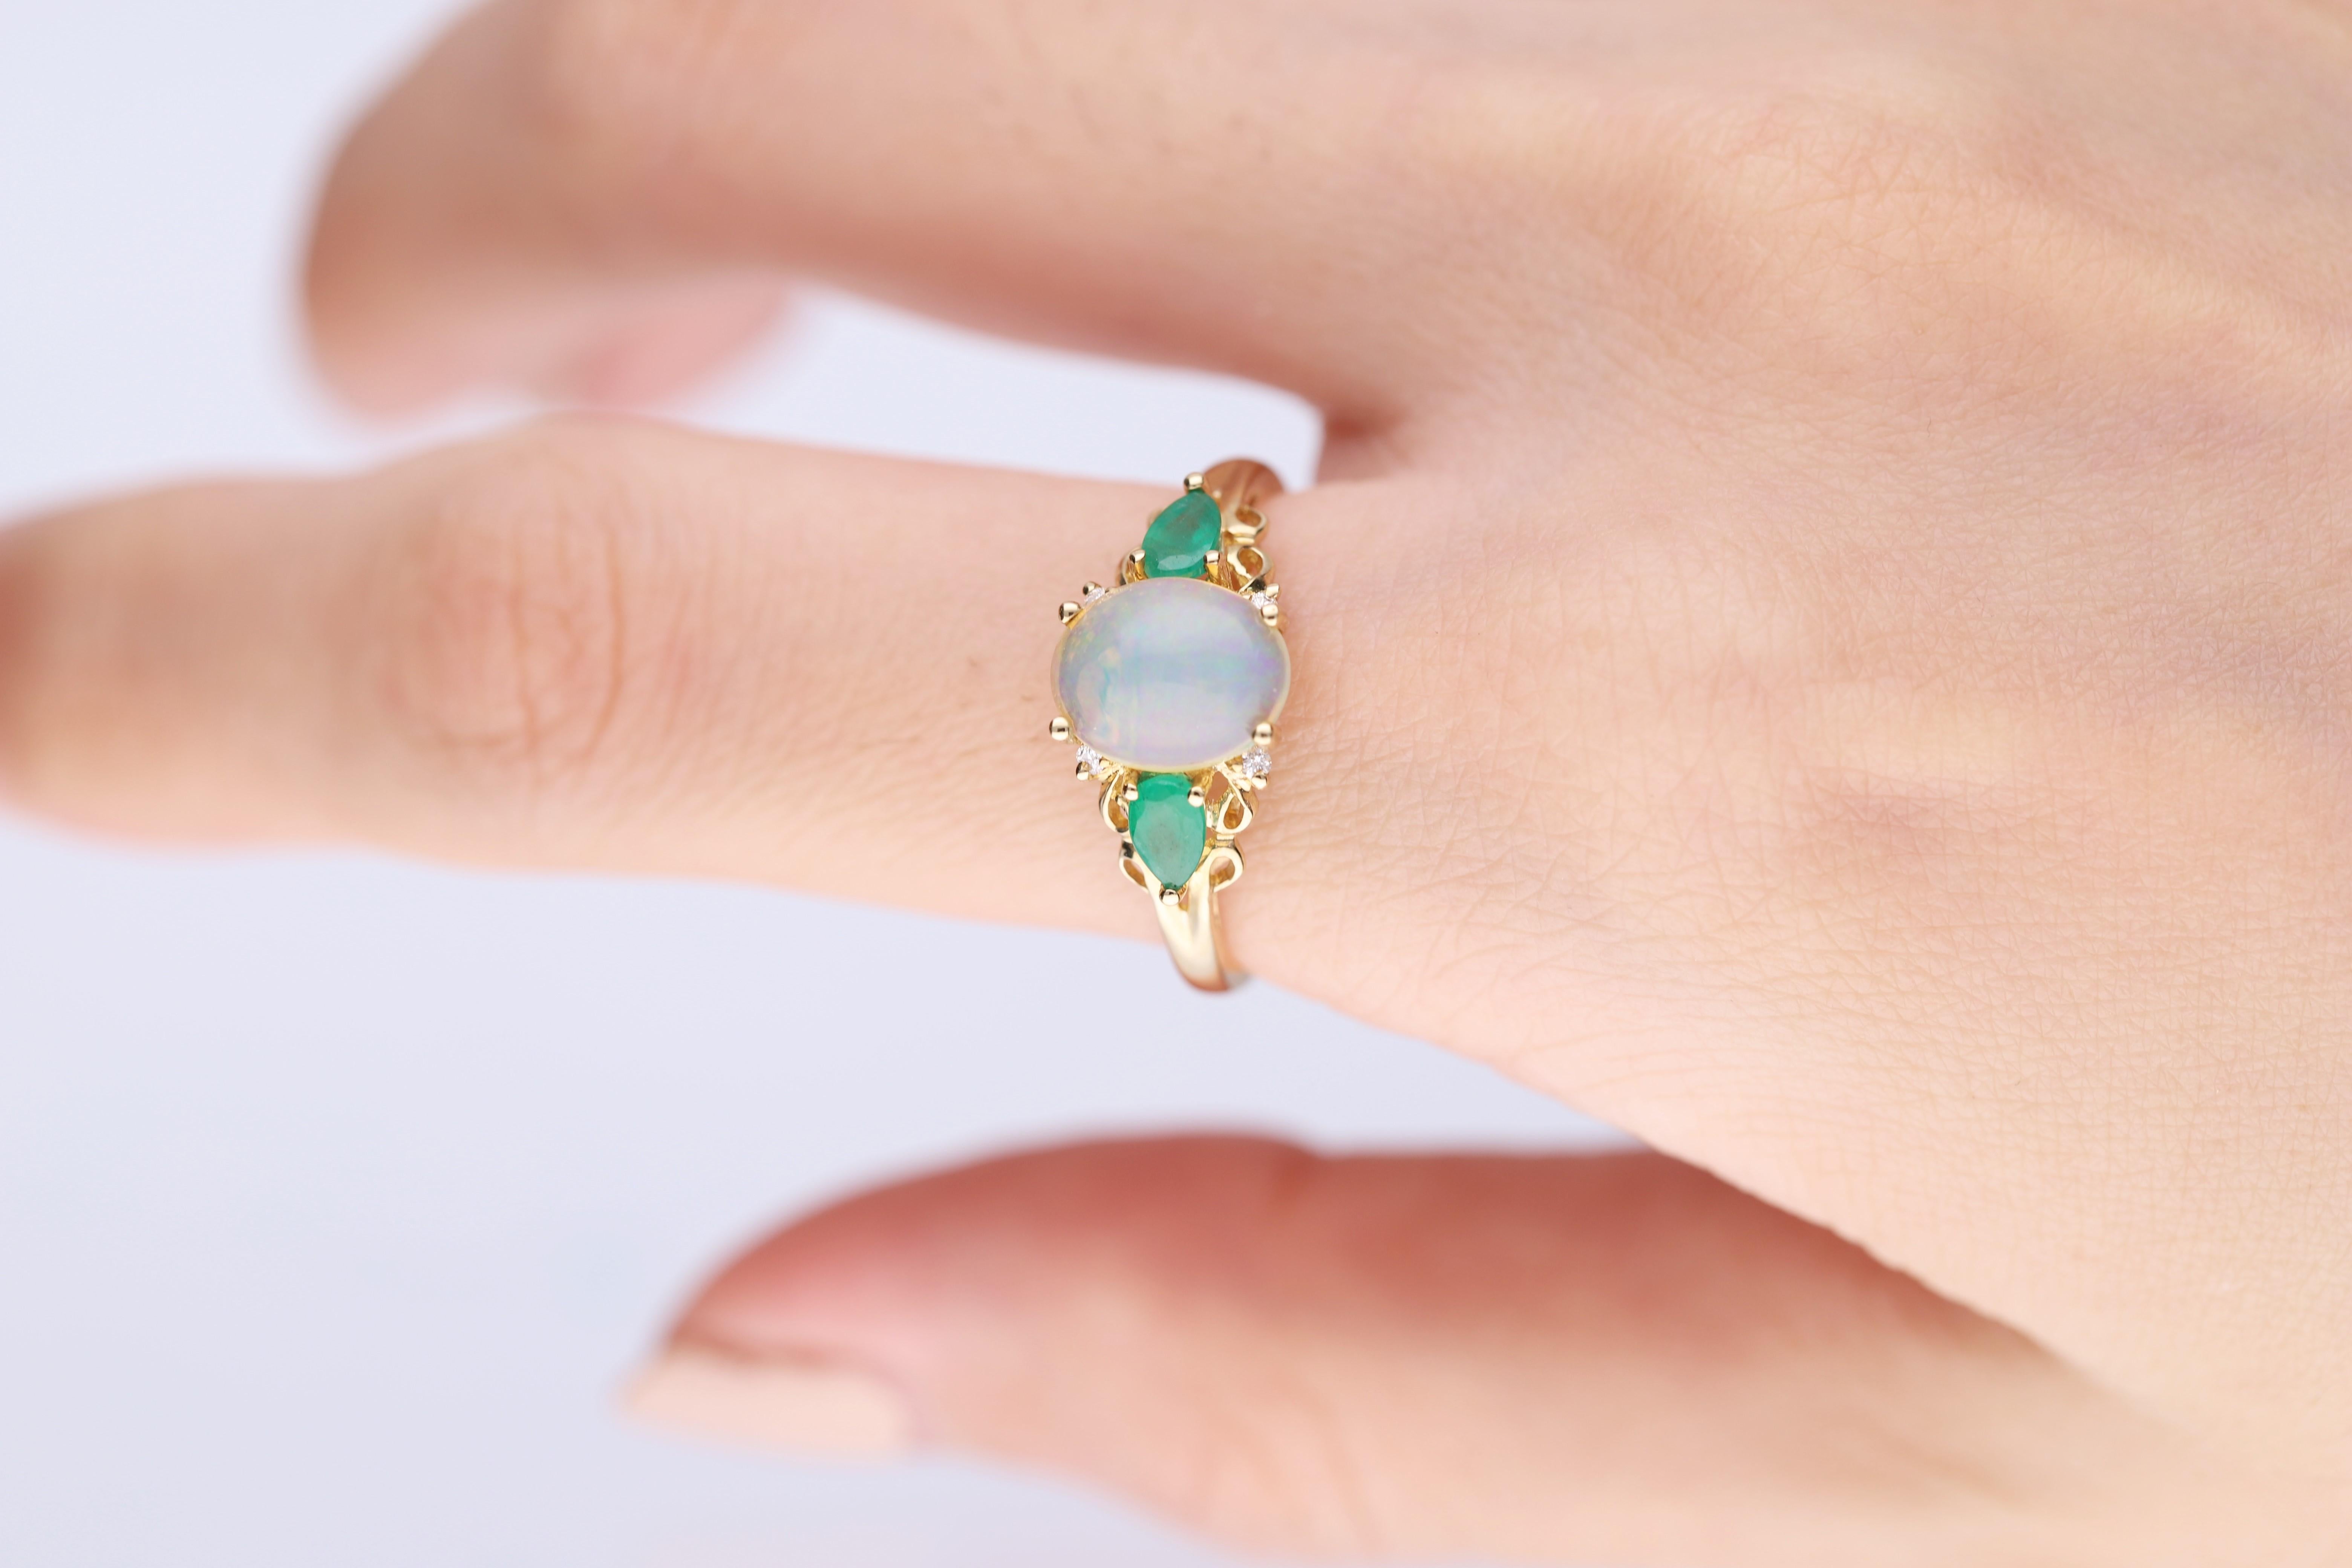 Stunning, timeless and classy eternity Unique Ring. Decorate yourself in luxury with this Gin & Grace Ring. The 10k Yellow Gold jewelry boasts Oval Cab Prong Setting Genuine Ethiopian Opal (1 pcs) 1.48 Carat, Pear cut Emerald (2 pcs) 0.41 carat,